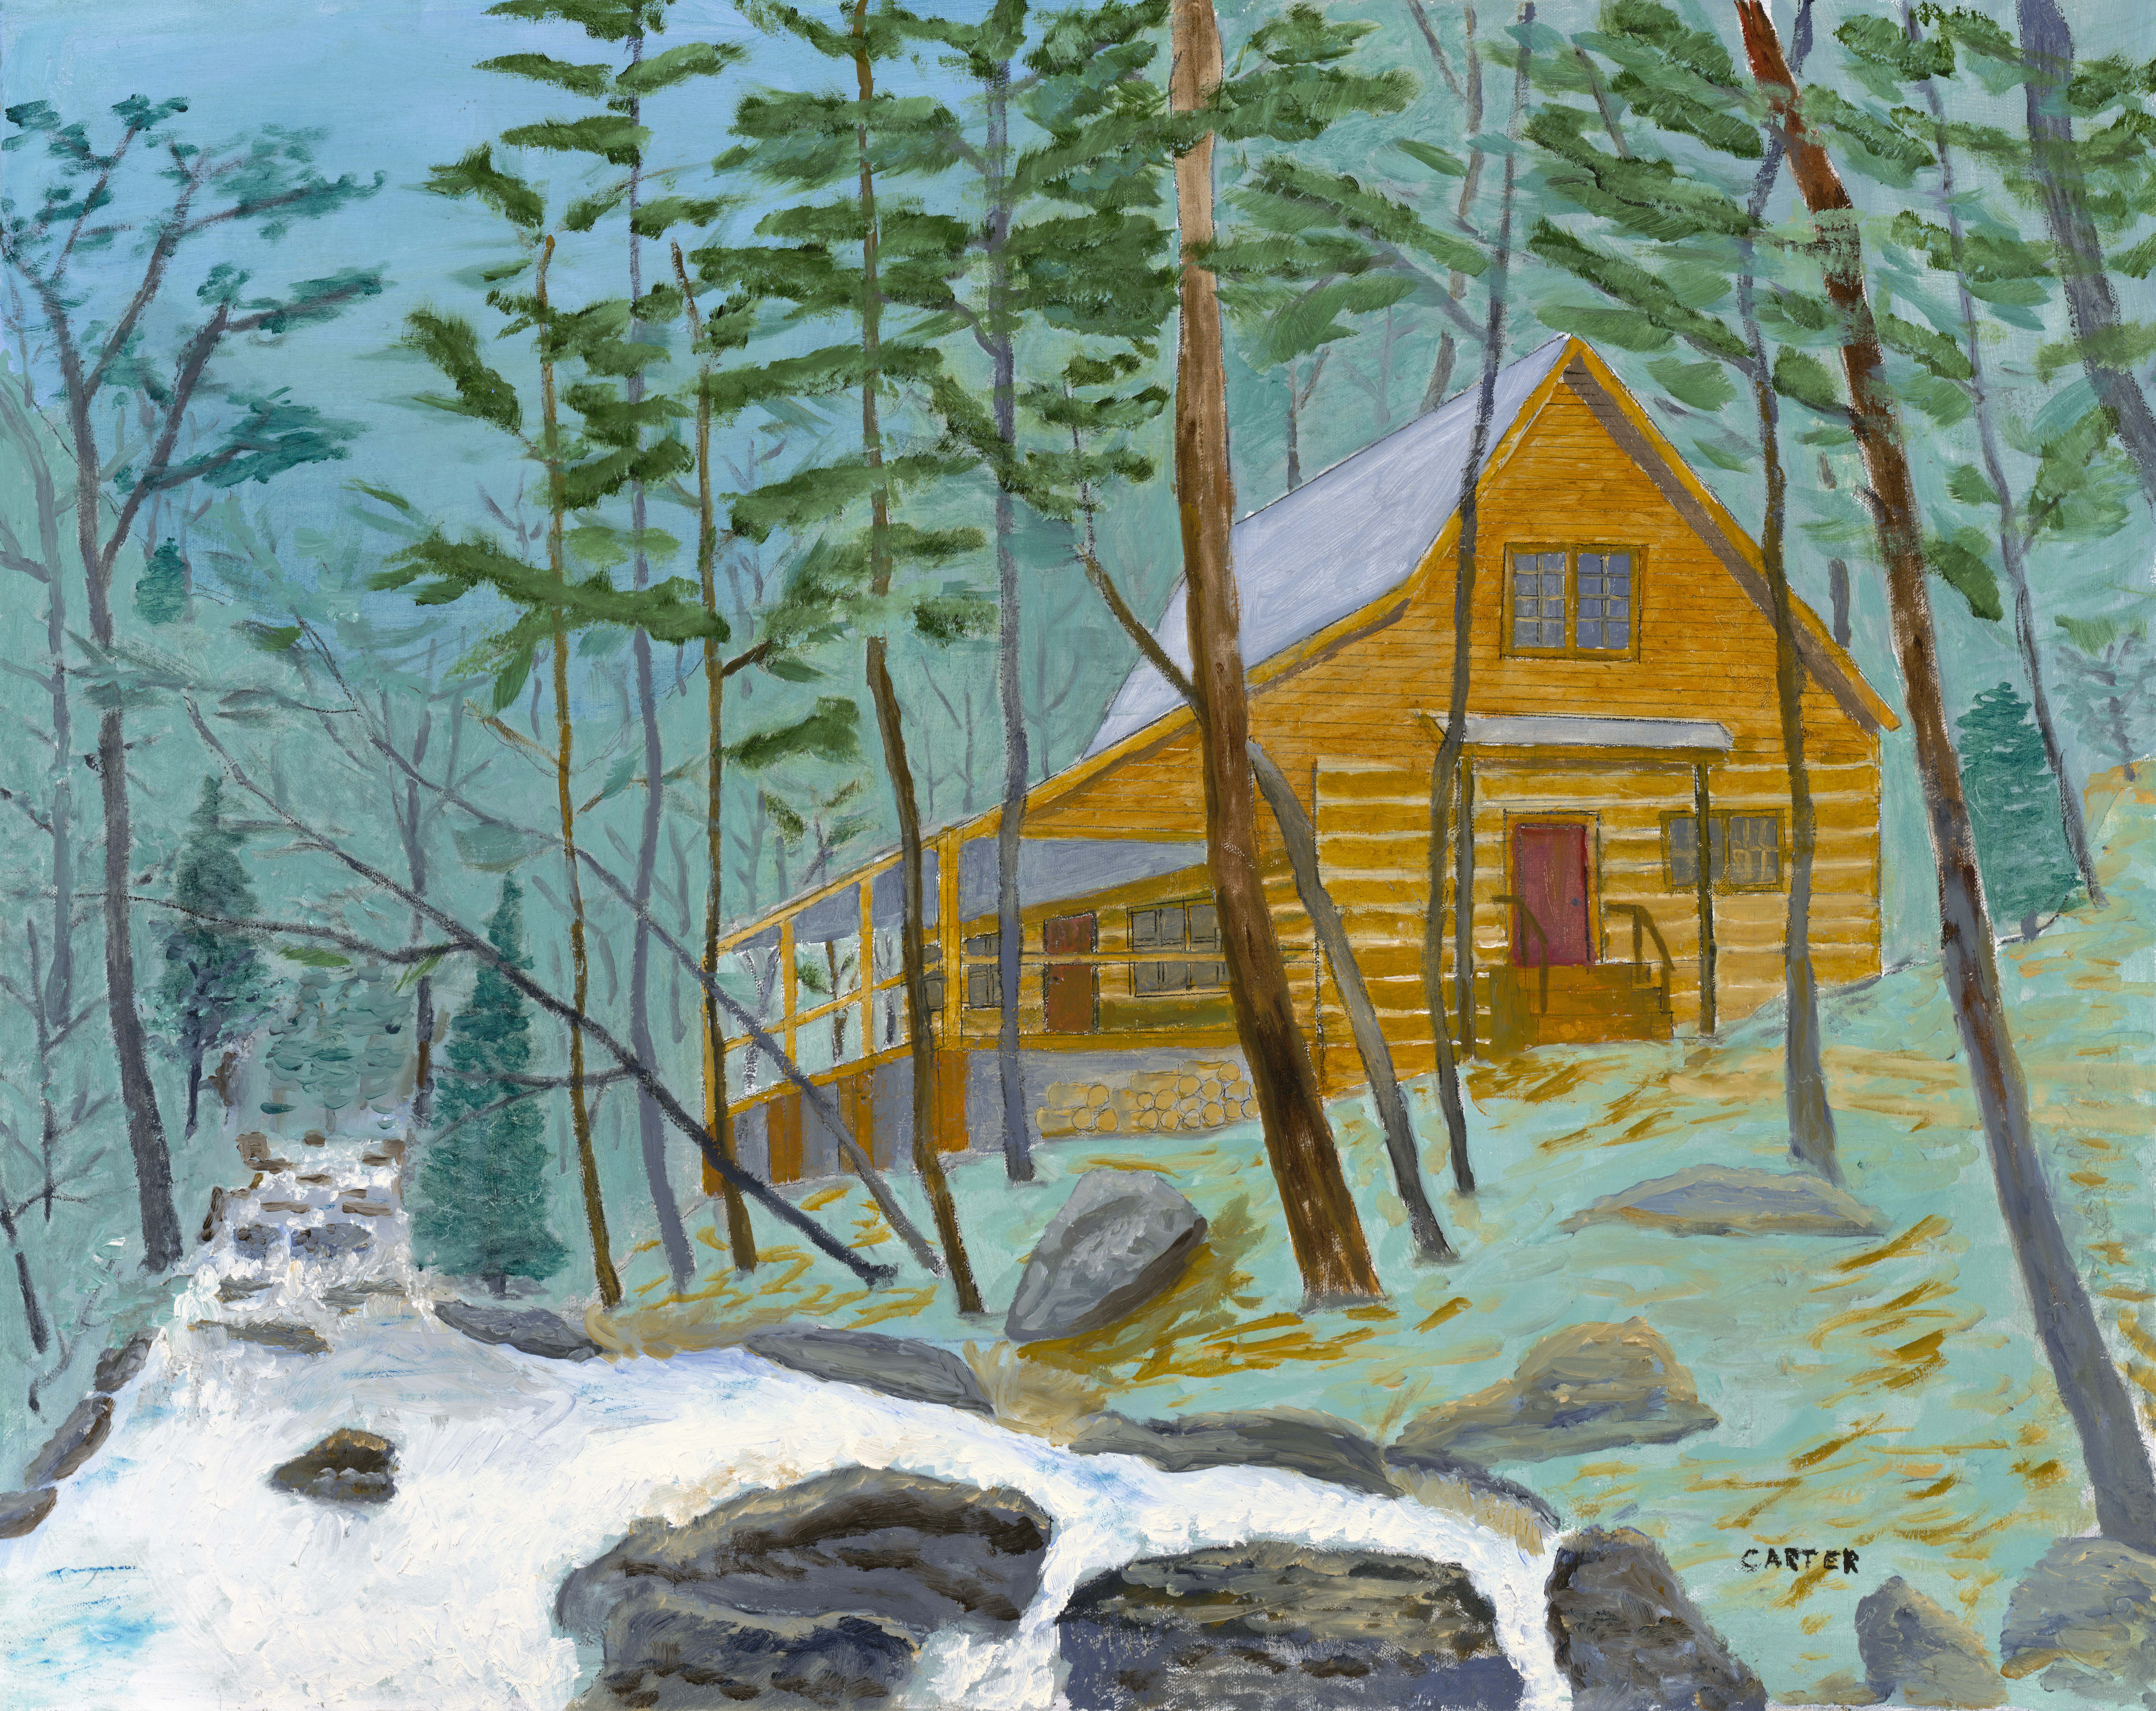  “Mountain Cabin,” an original work of art painted by President Carter in 2010, has been hanging in his house in Plains, Georgia. It sold at the benefit auction for $210,000.